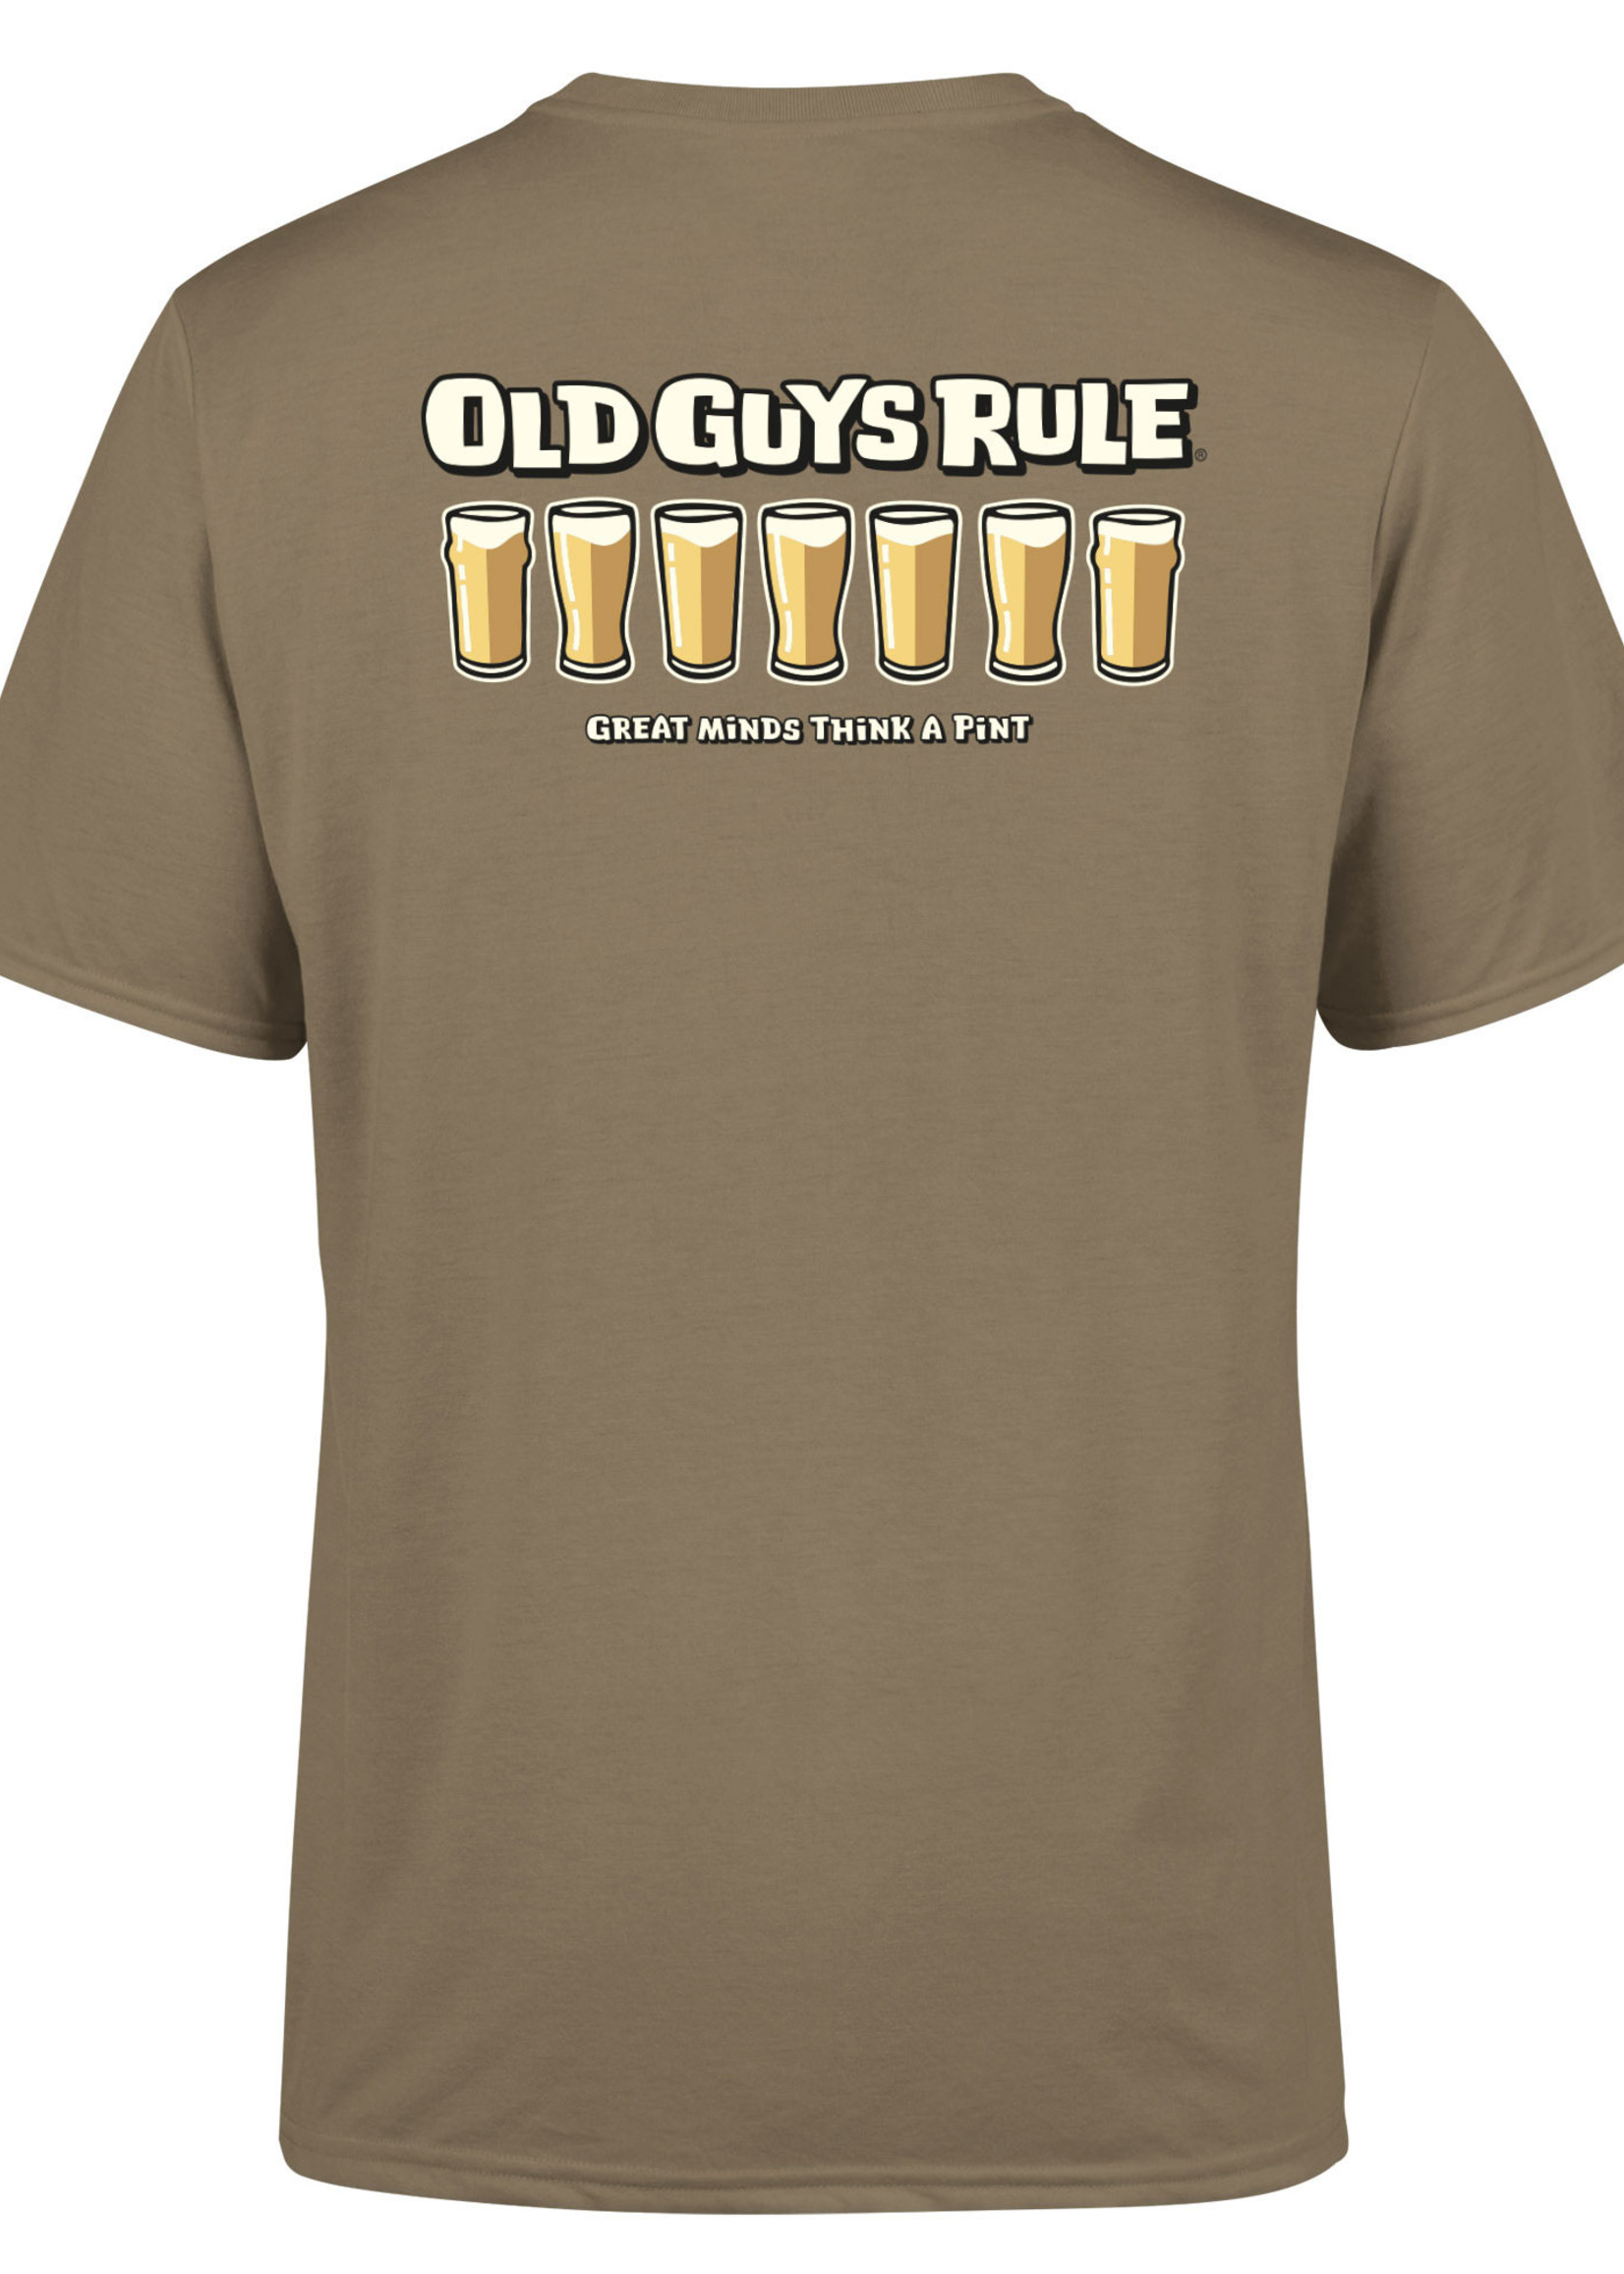 Old Guys Rule Old Guys Rule t-shirt Think a pint